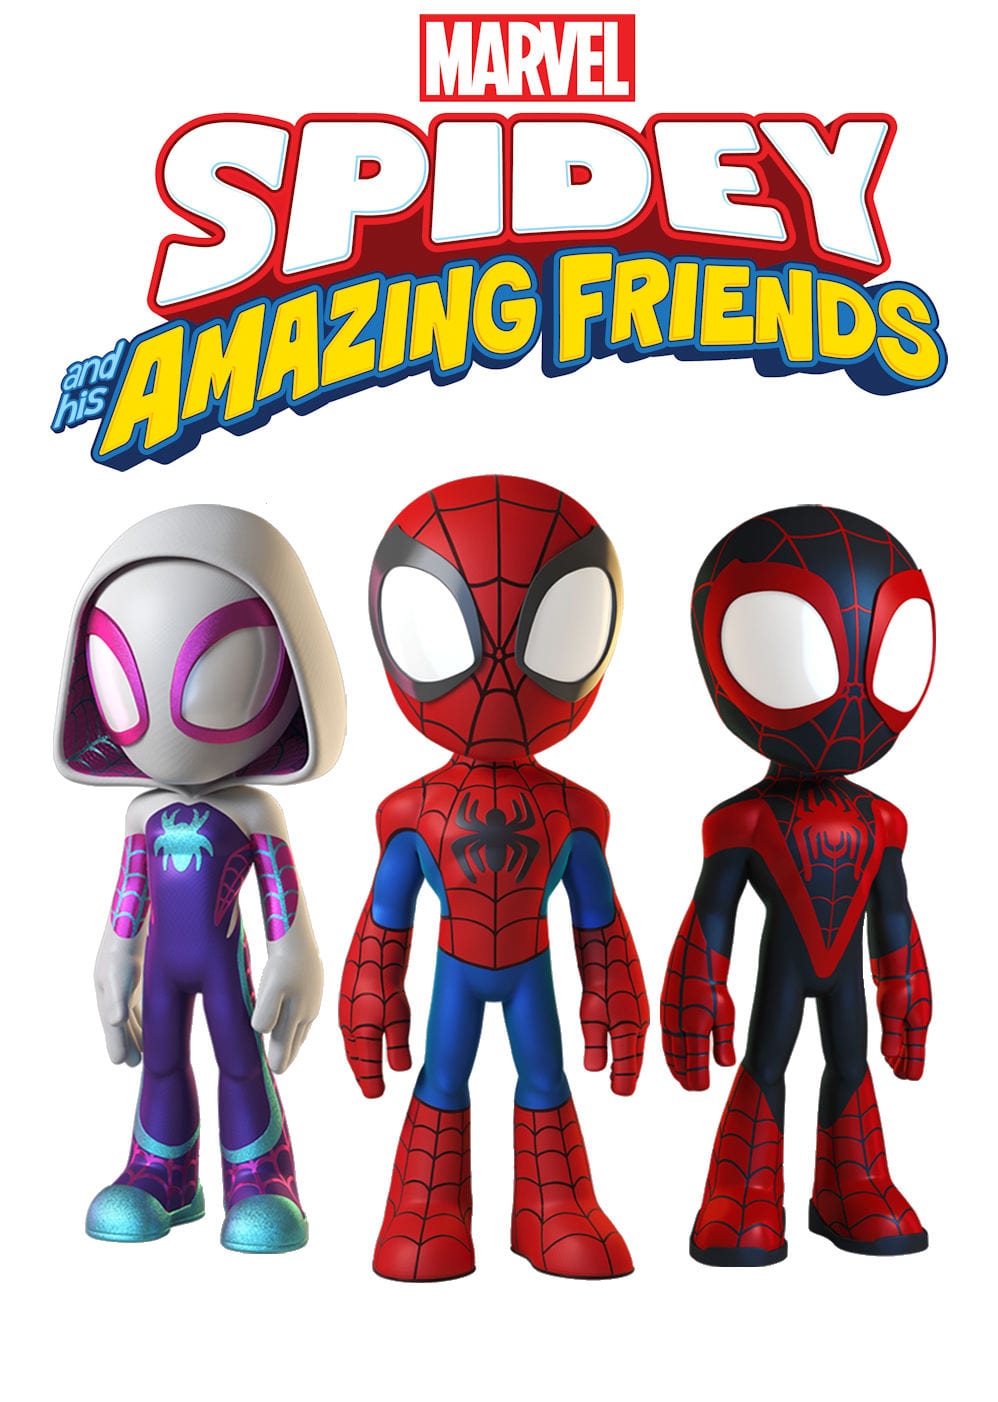 Marvel's Spidey and His Amazing Friends teaser image